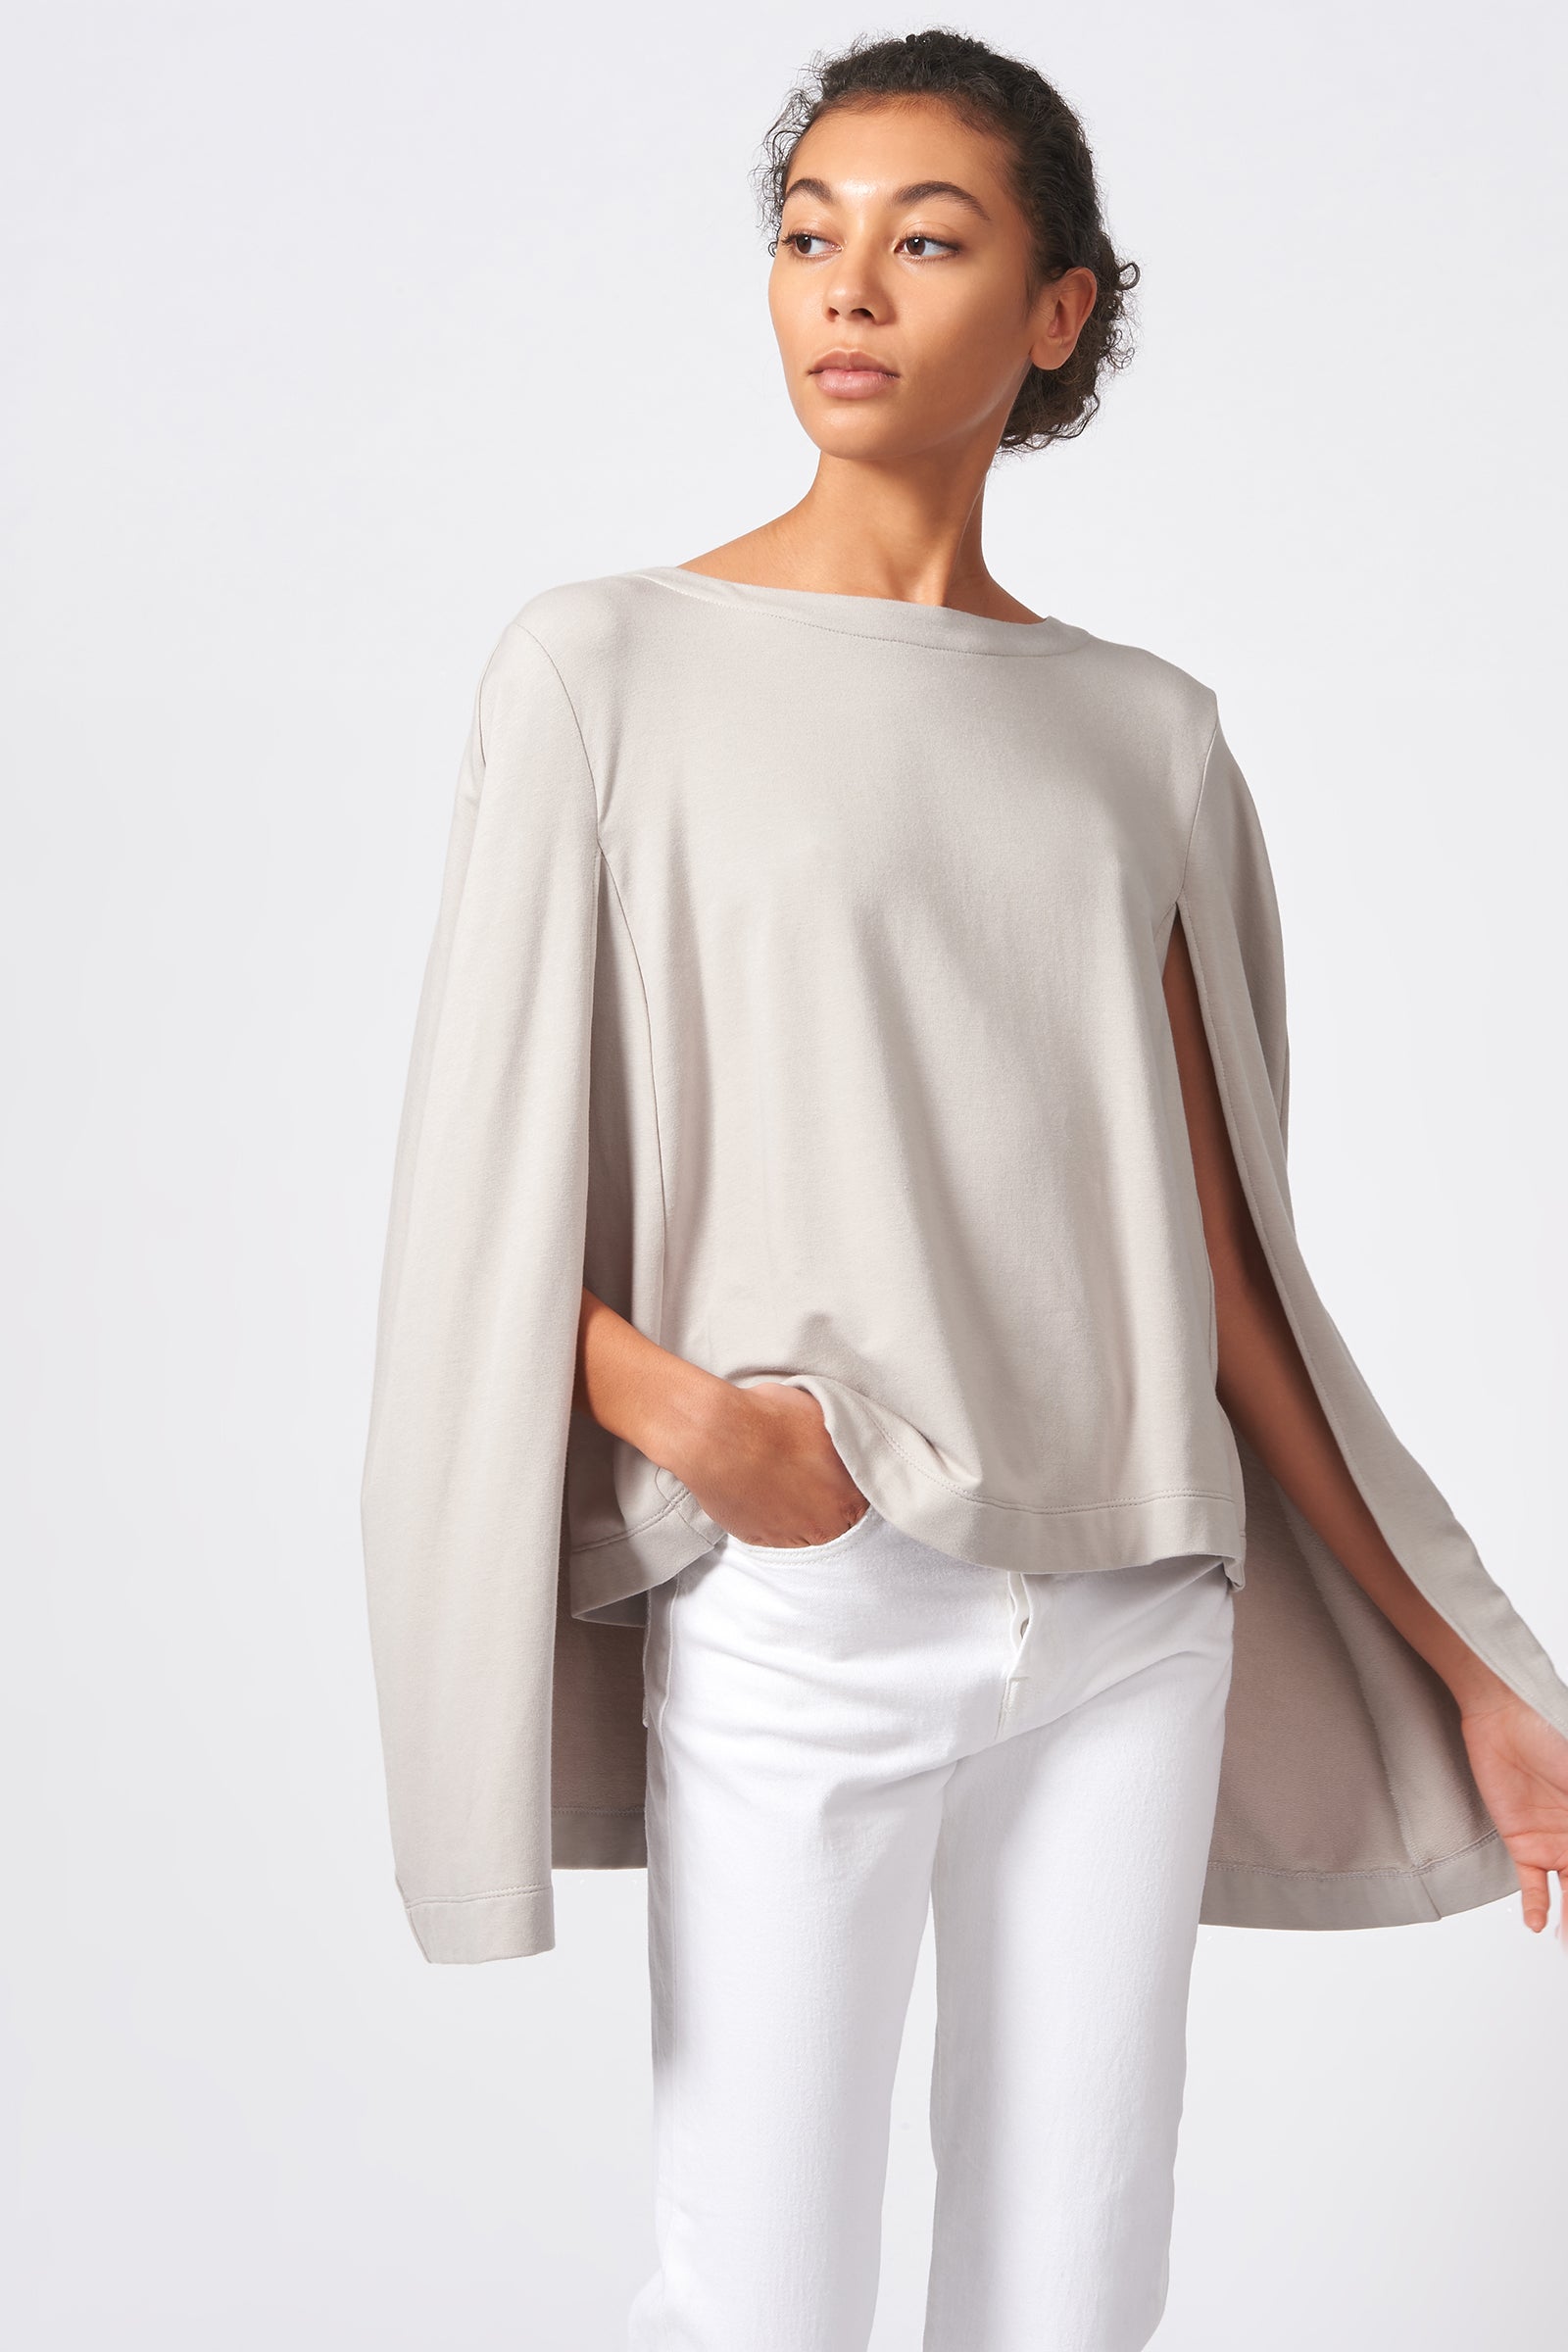 Ginna Box Pleat Shirt in White Stretch Made From a Cotton Blend